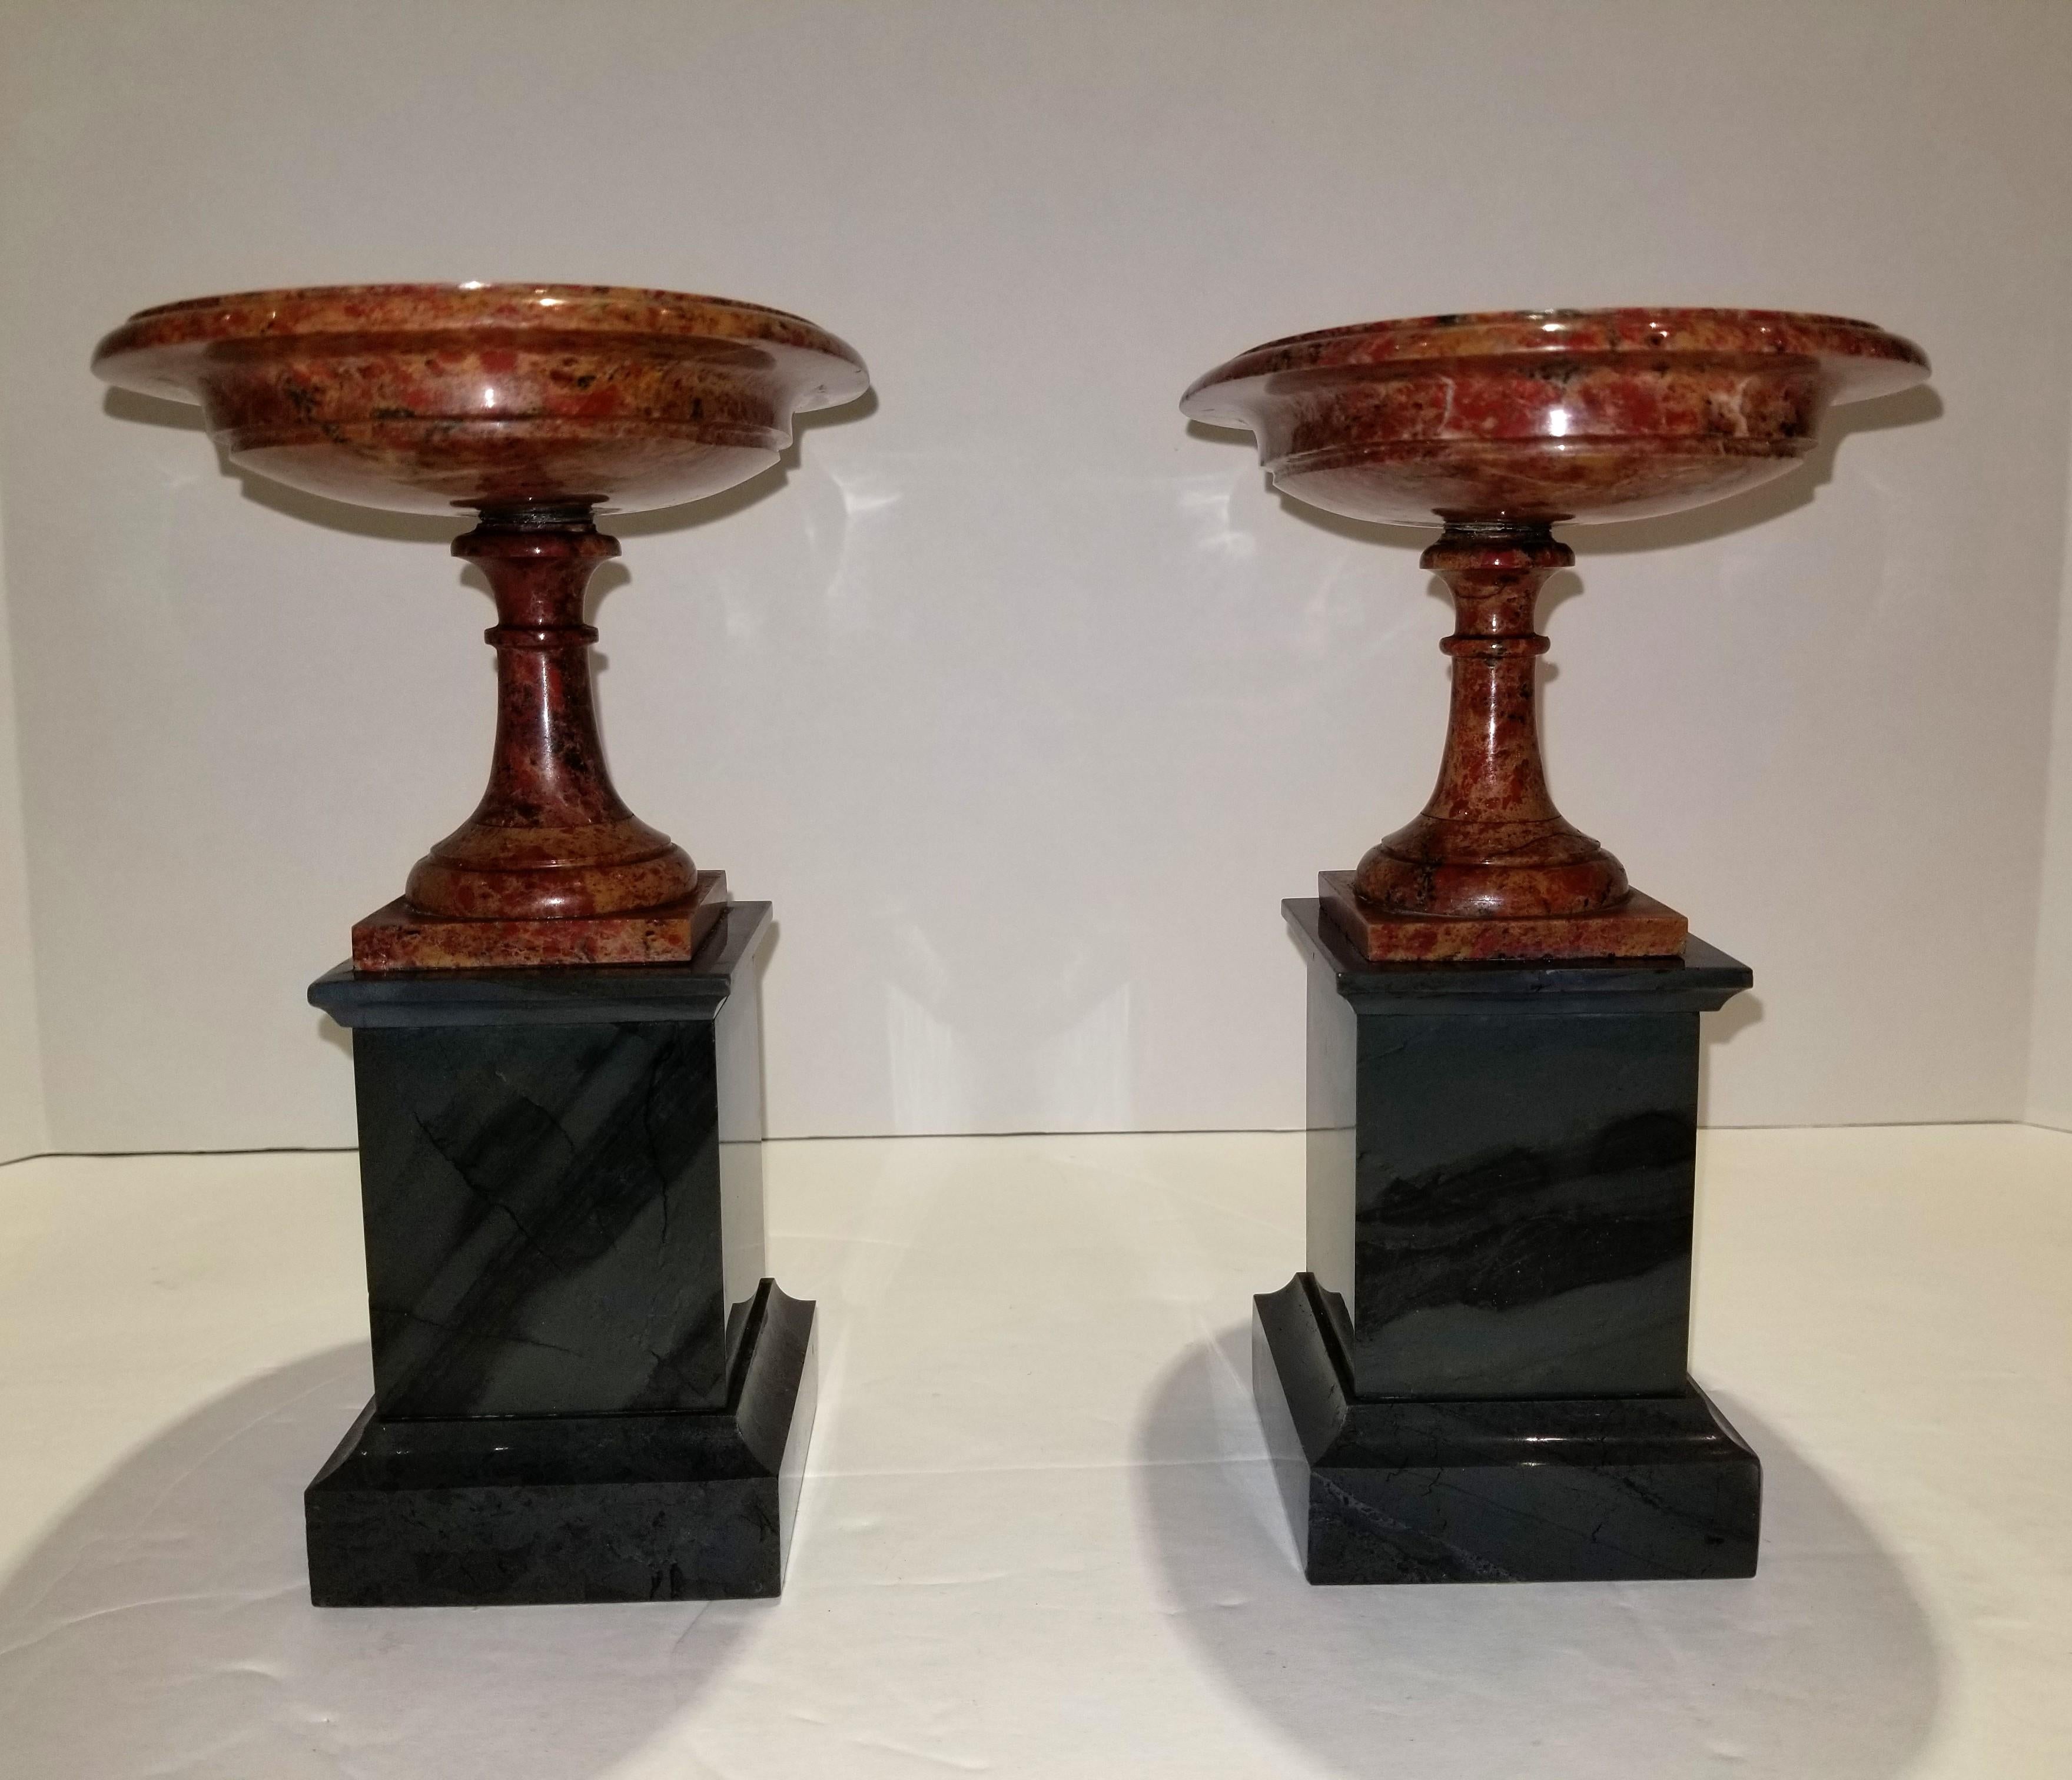 Remarkable pair of Russian neoclassical period red jasper and Russian Kalgar jasper oval shaped tazzas. These beautiful hand-carved oval shaped Russian red jasper tazzas are seated on two beautiful hand-carved and hand polished kalgar jasper column